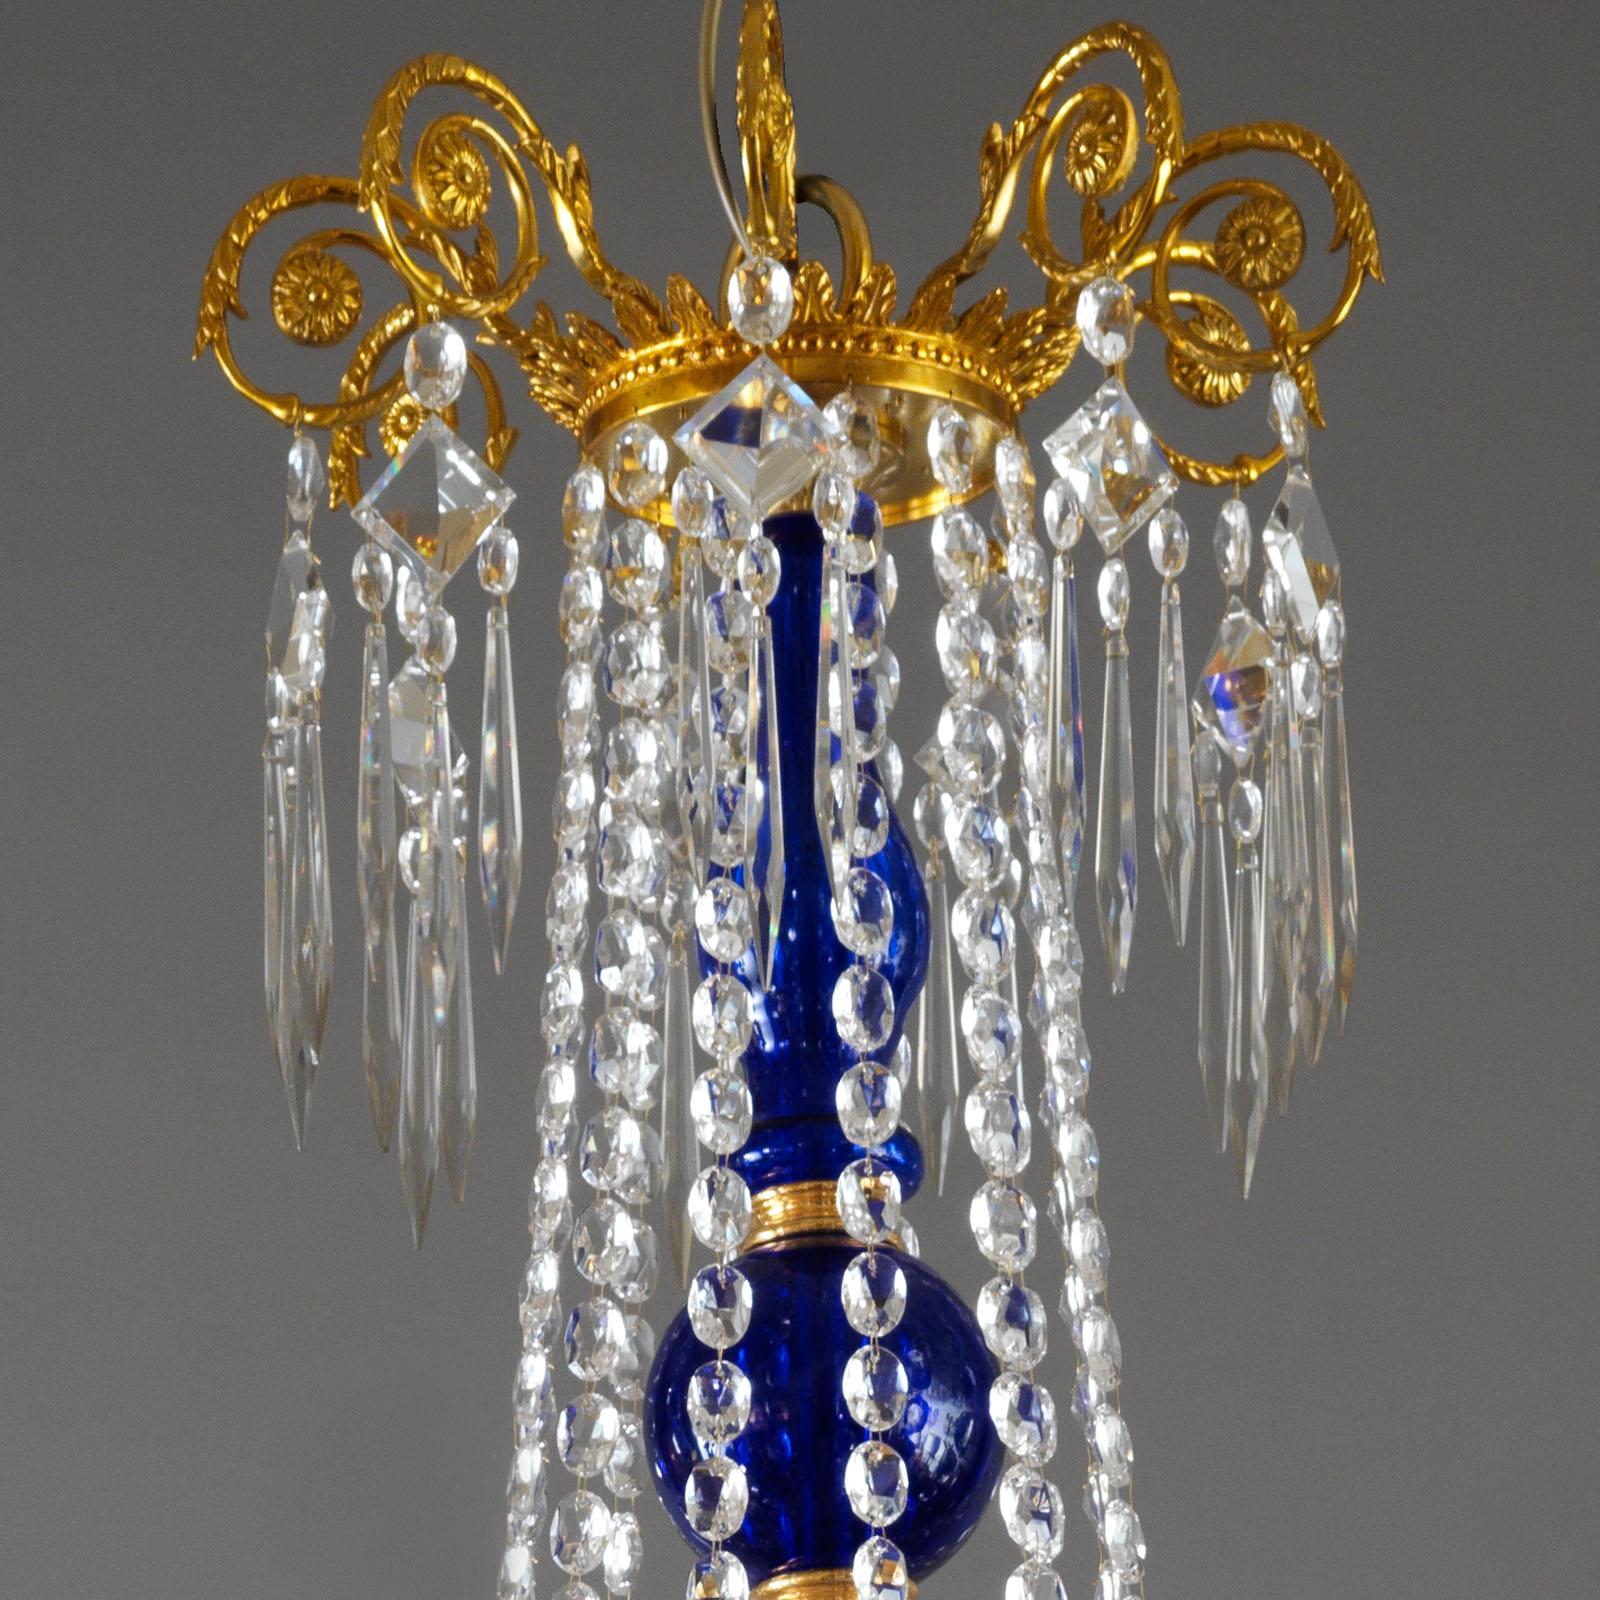 This Neoclassical Baltic Style Chandelier 54-lights by Gherardo Degli Albizzi, is enriched with Cobalt Blue glass .
The elegant top crown suspends Bohemian crystal drops supported by a cobalt blue glass centerpiece.
This chandelier features five